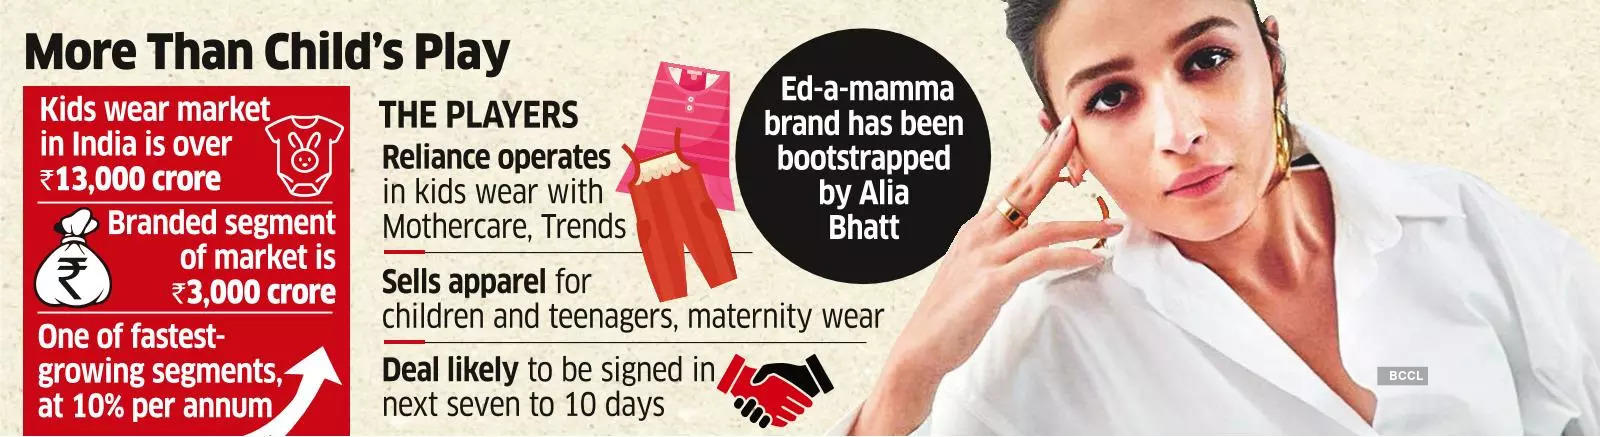 Reliance Set to Buy Alia’s Ed-a-Mamma for ₹300-350 cr